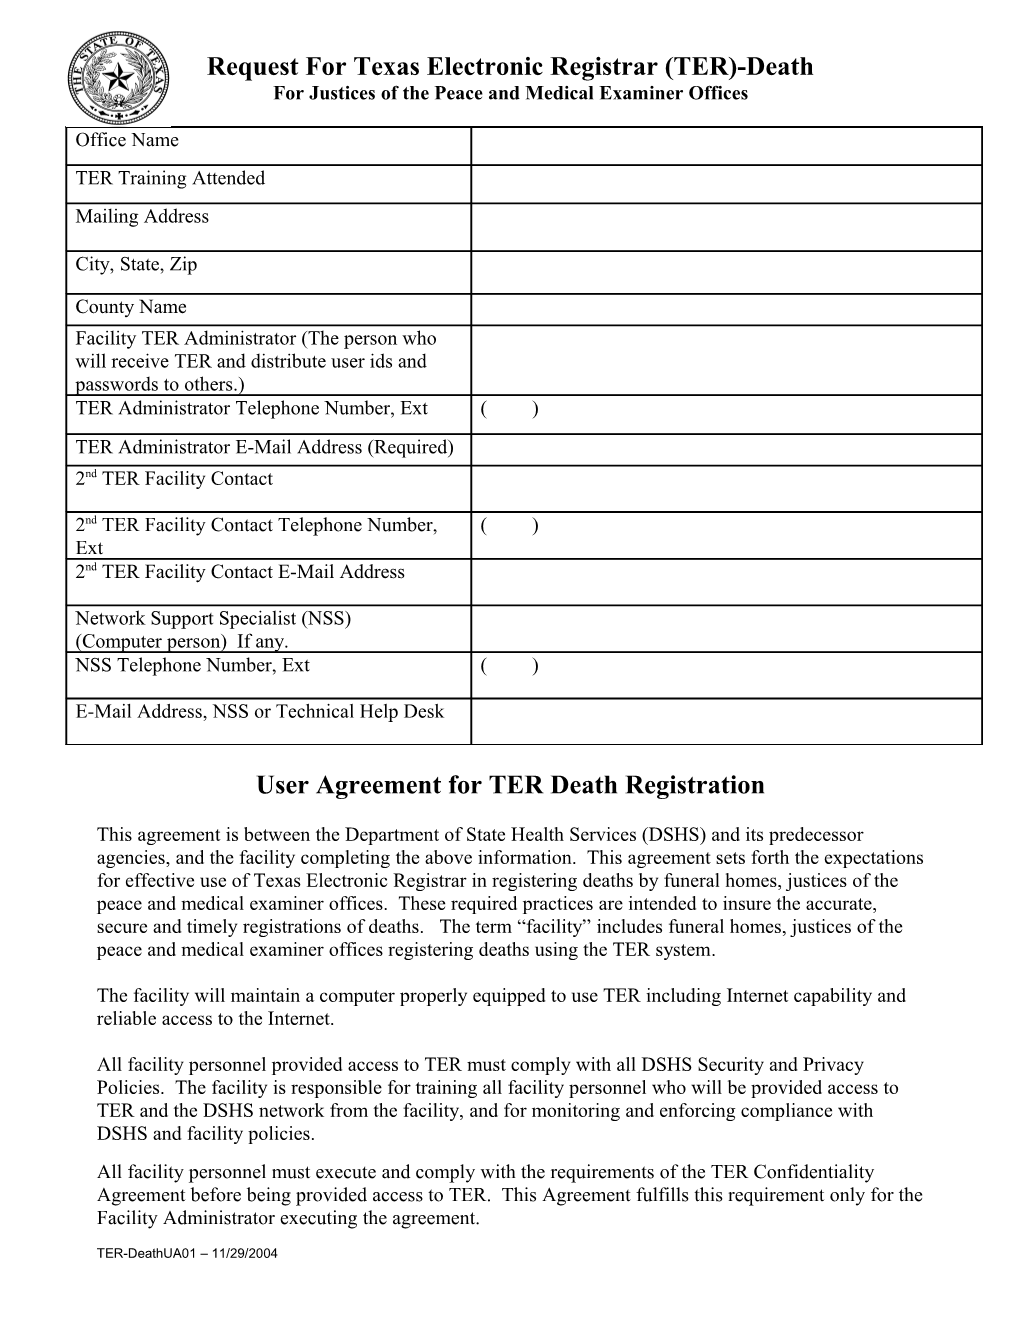 Request for Texas Electronic Registrar (TER)-Death